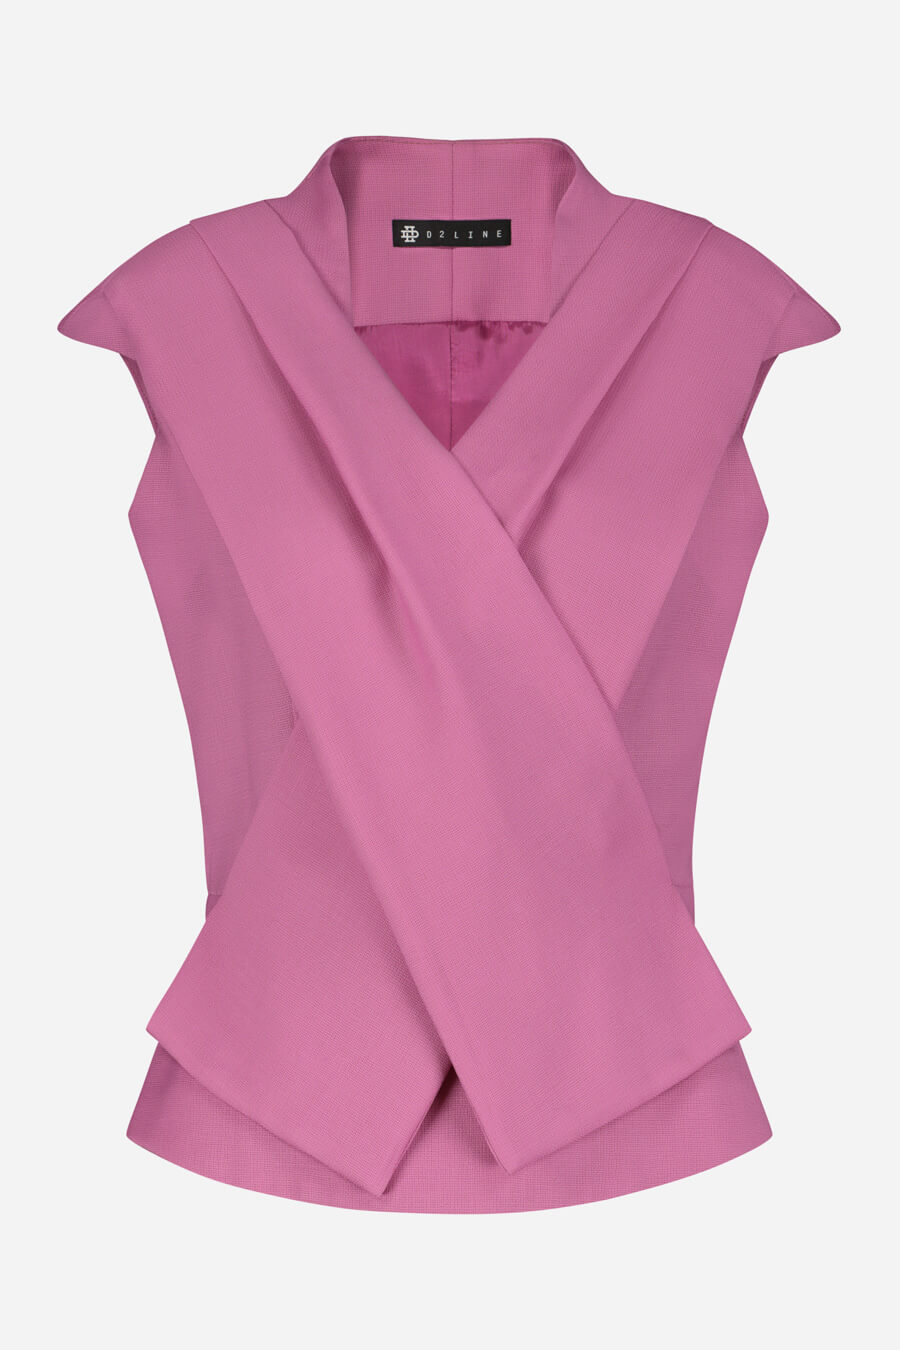 Peplum top with crossed front panels in pink | D2line